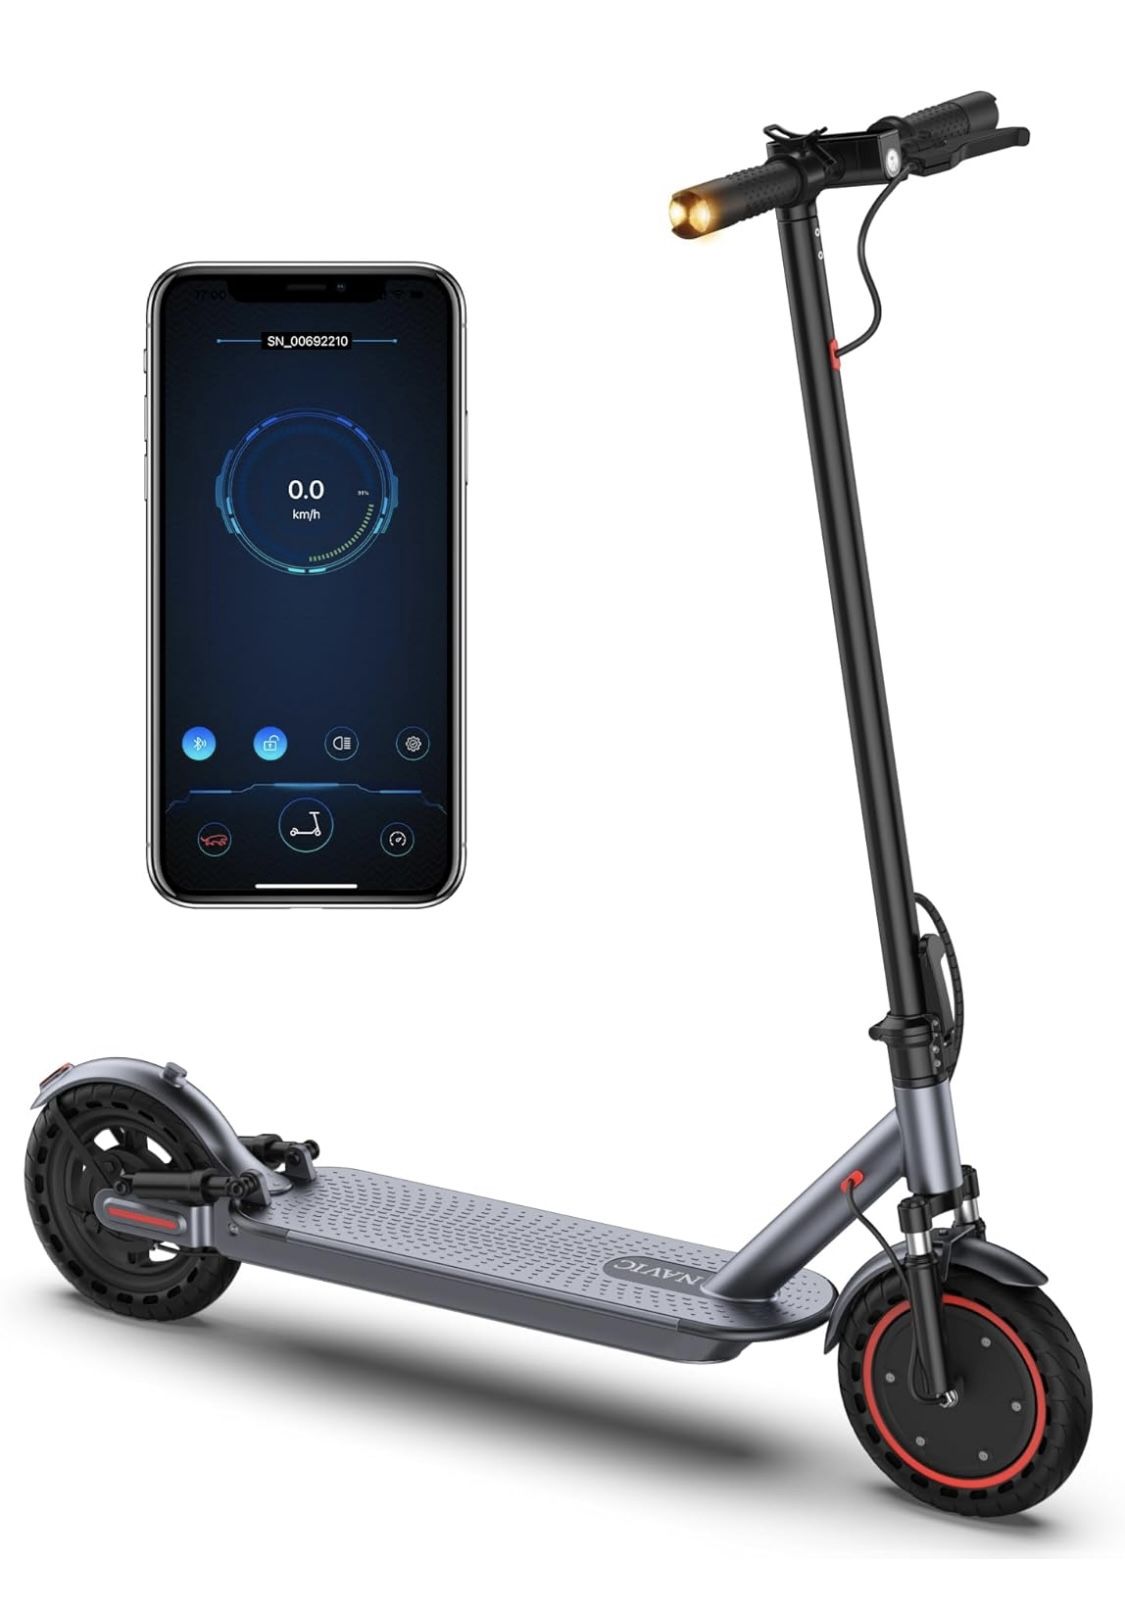 Electric Scooter - 8.5" Solid Tires, Quadruple Shock Absorption, Up to 20 Miles Long-Range, 20Mph Top Speed, Portable Folding Commuting Scooter for Ad